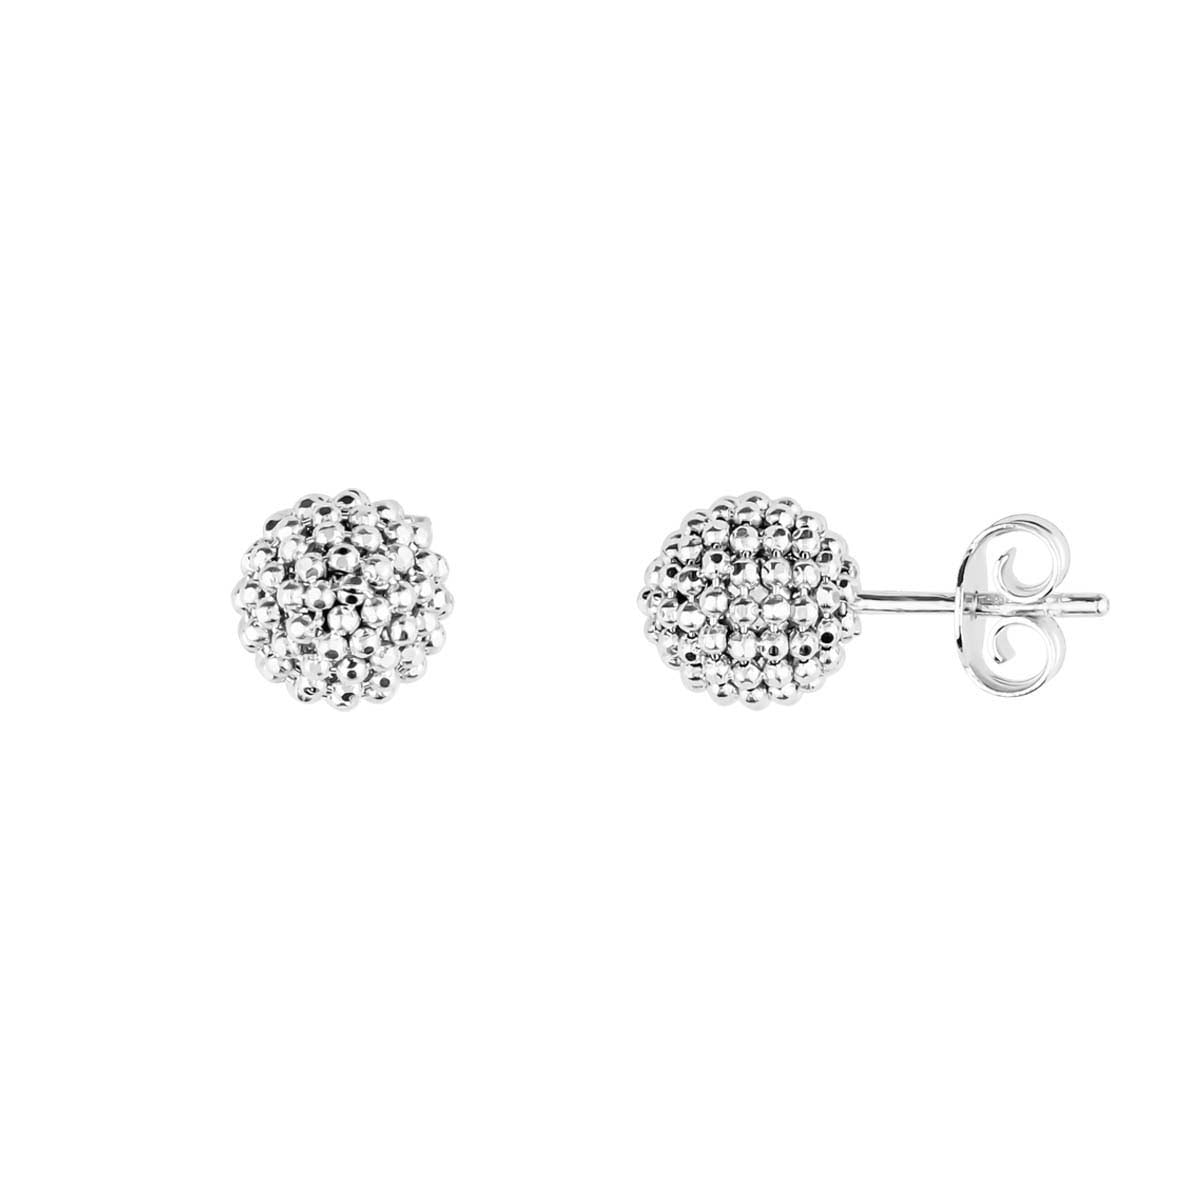 Auric Signature 18ct White Gold Ball Stud Earrings